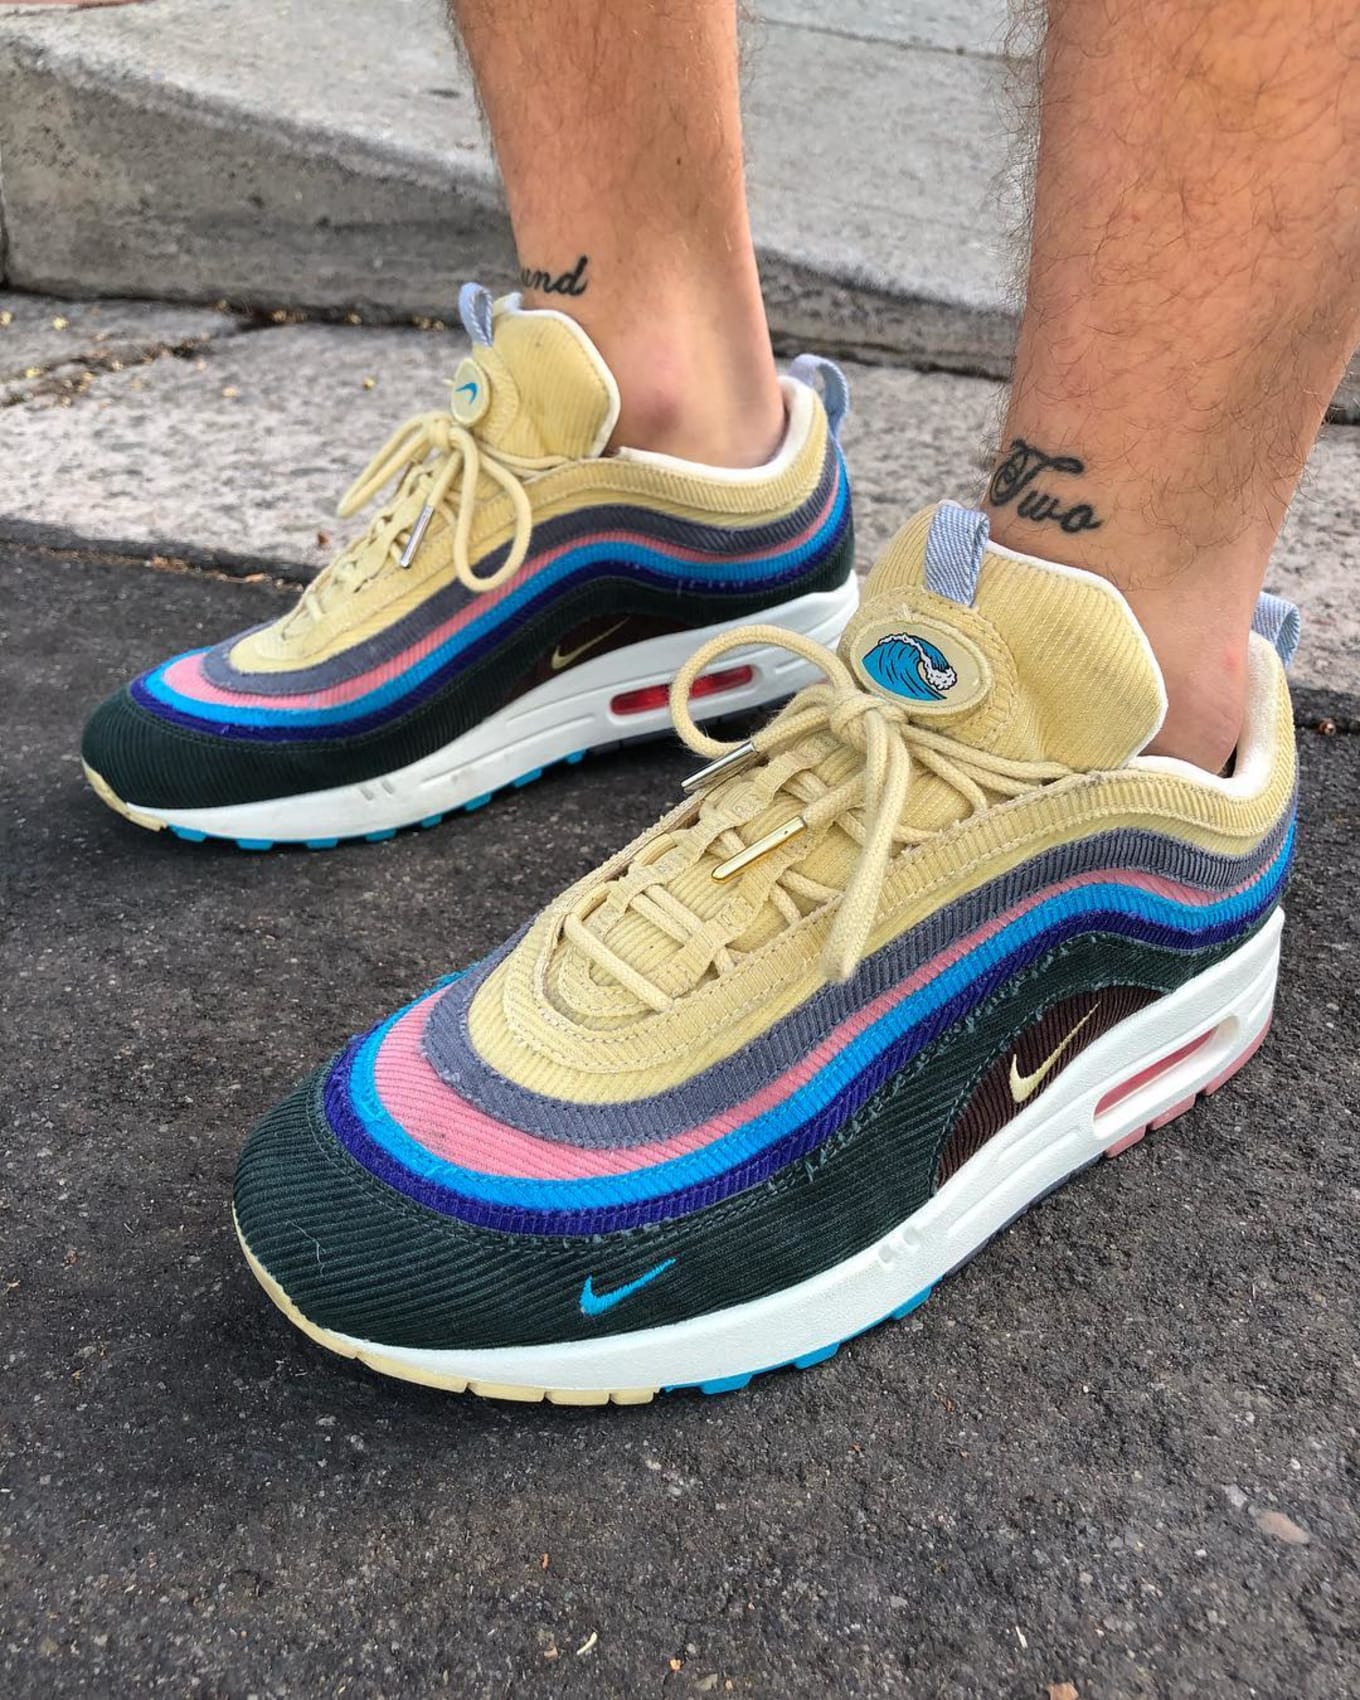 Sean Wotherspoon Nike Air Max 97 x Air Max 1 Hybrid Release Date ...